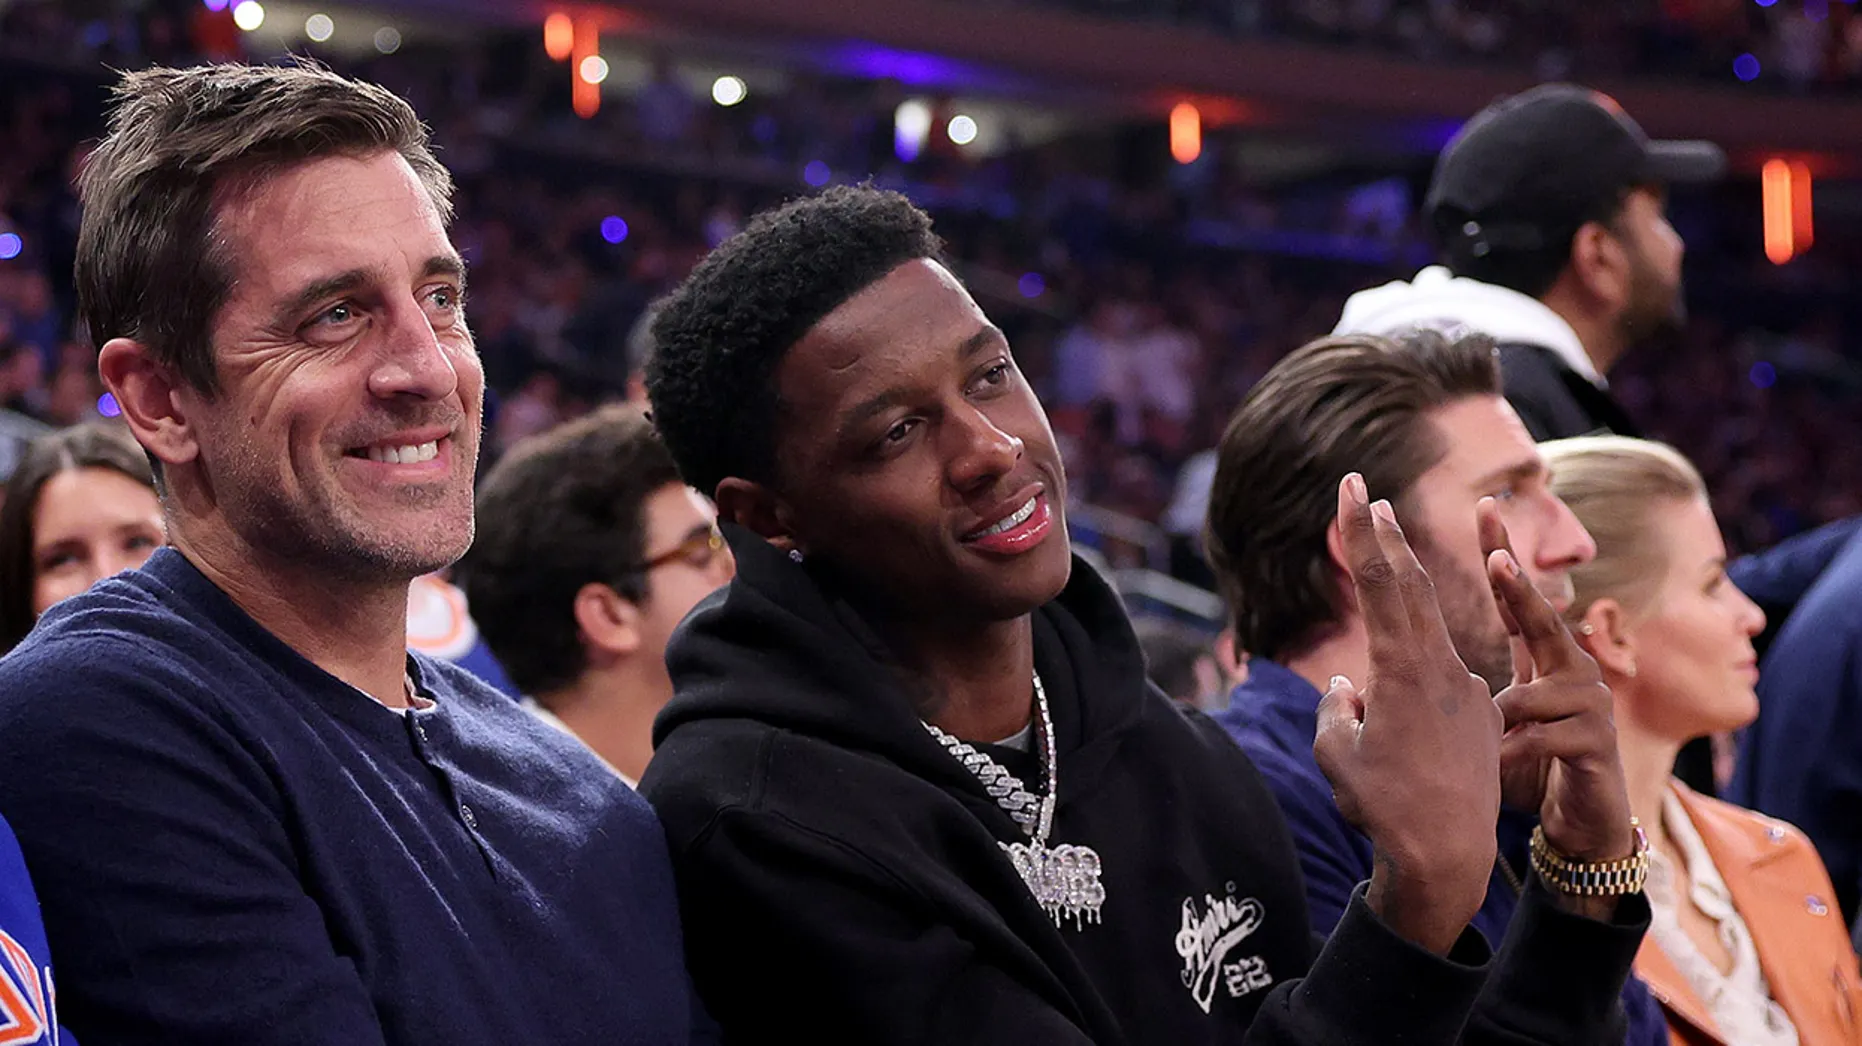 Jets’ Sauce Gardner says Aaron Rodgers couldn’t believe he didn’t know A-list actress at Knicks-Heat game